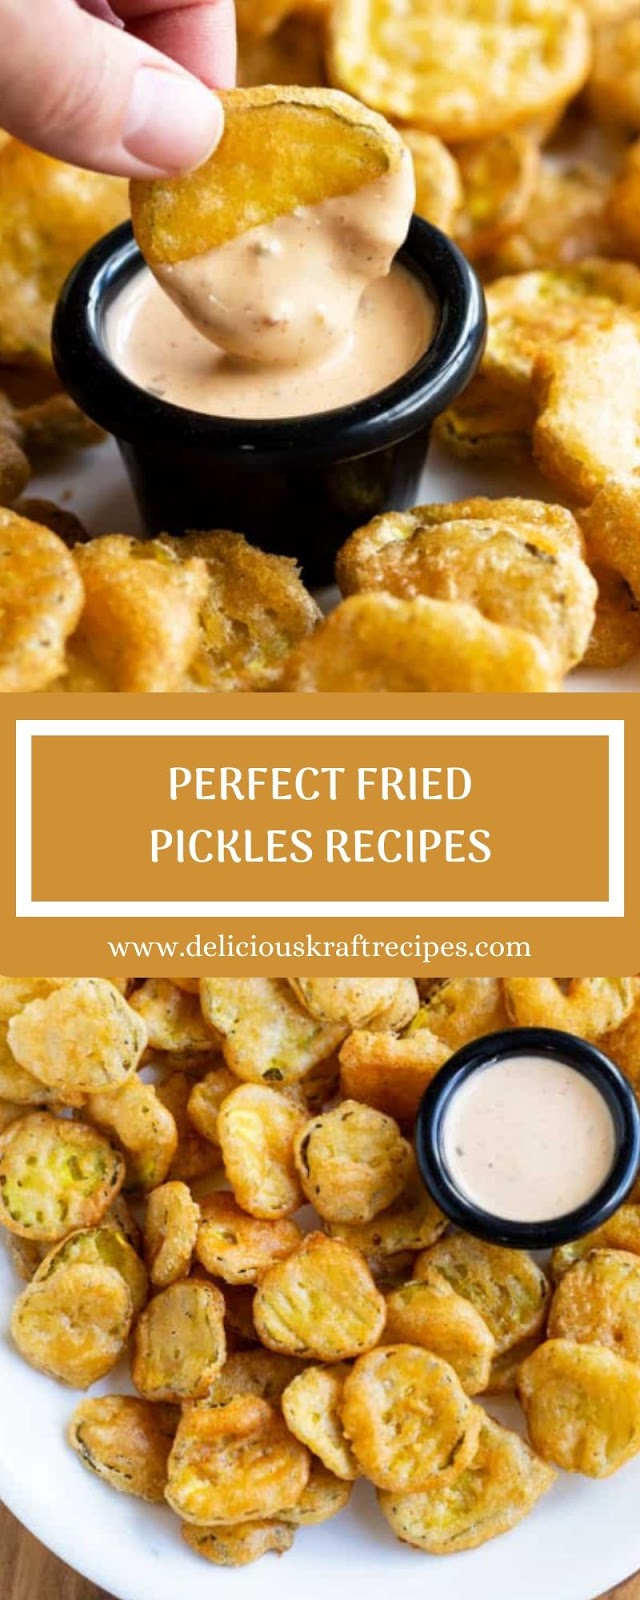 PERFECT FRIED PICKLES RECIPES